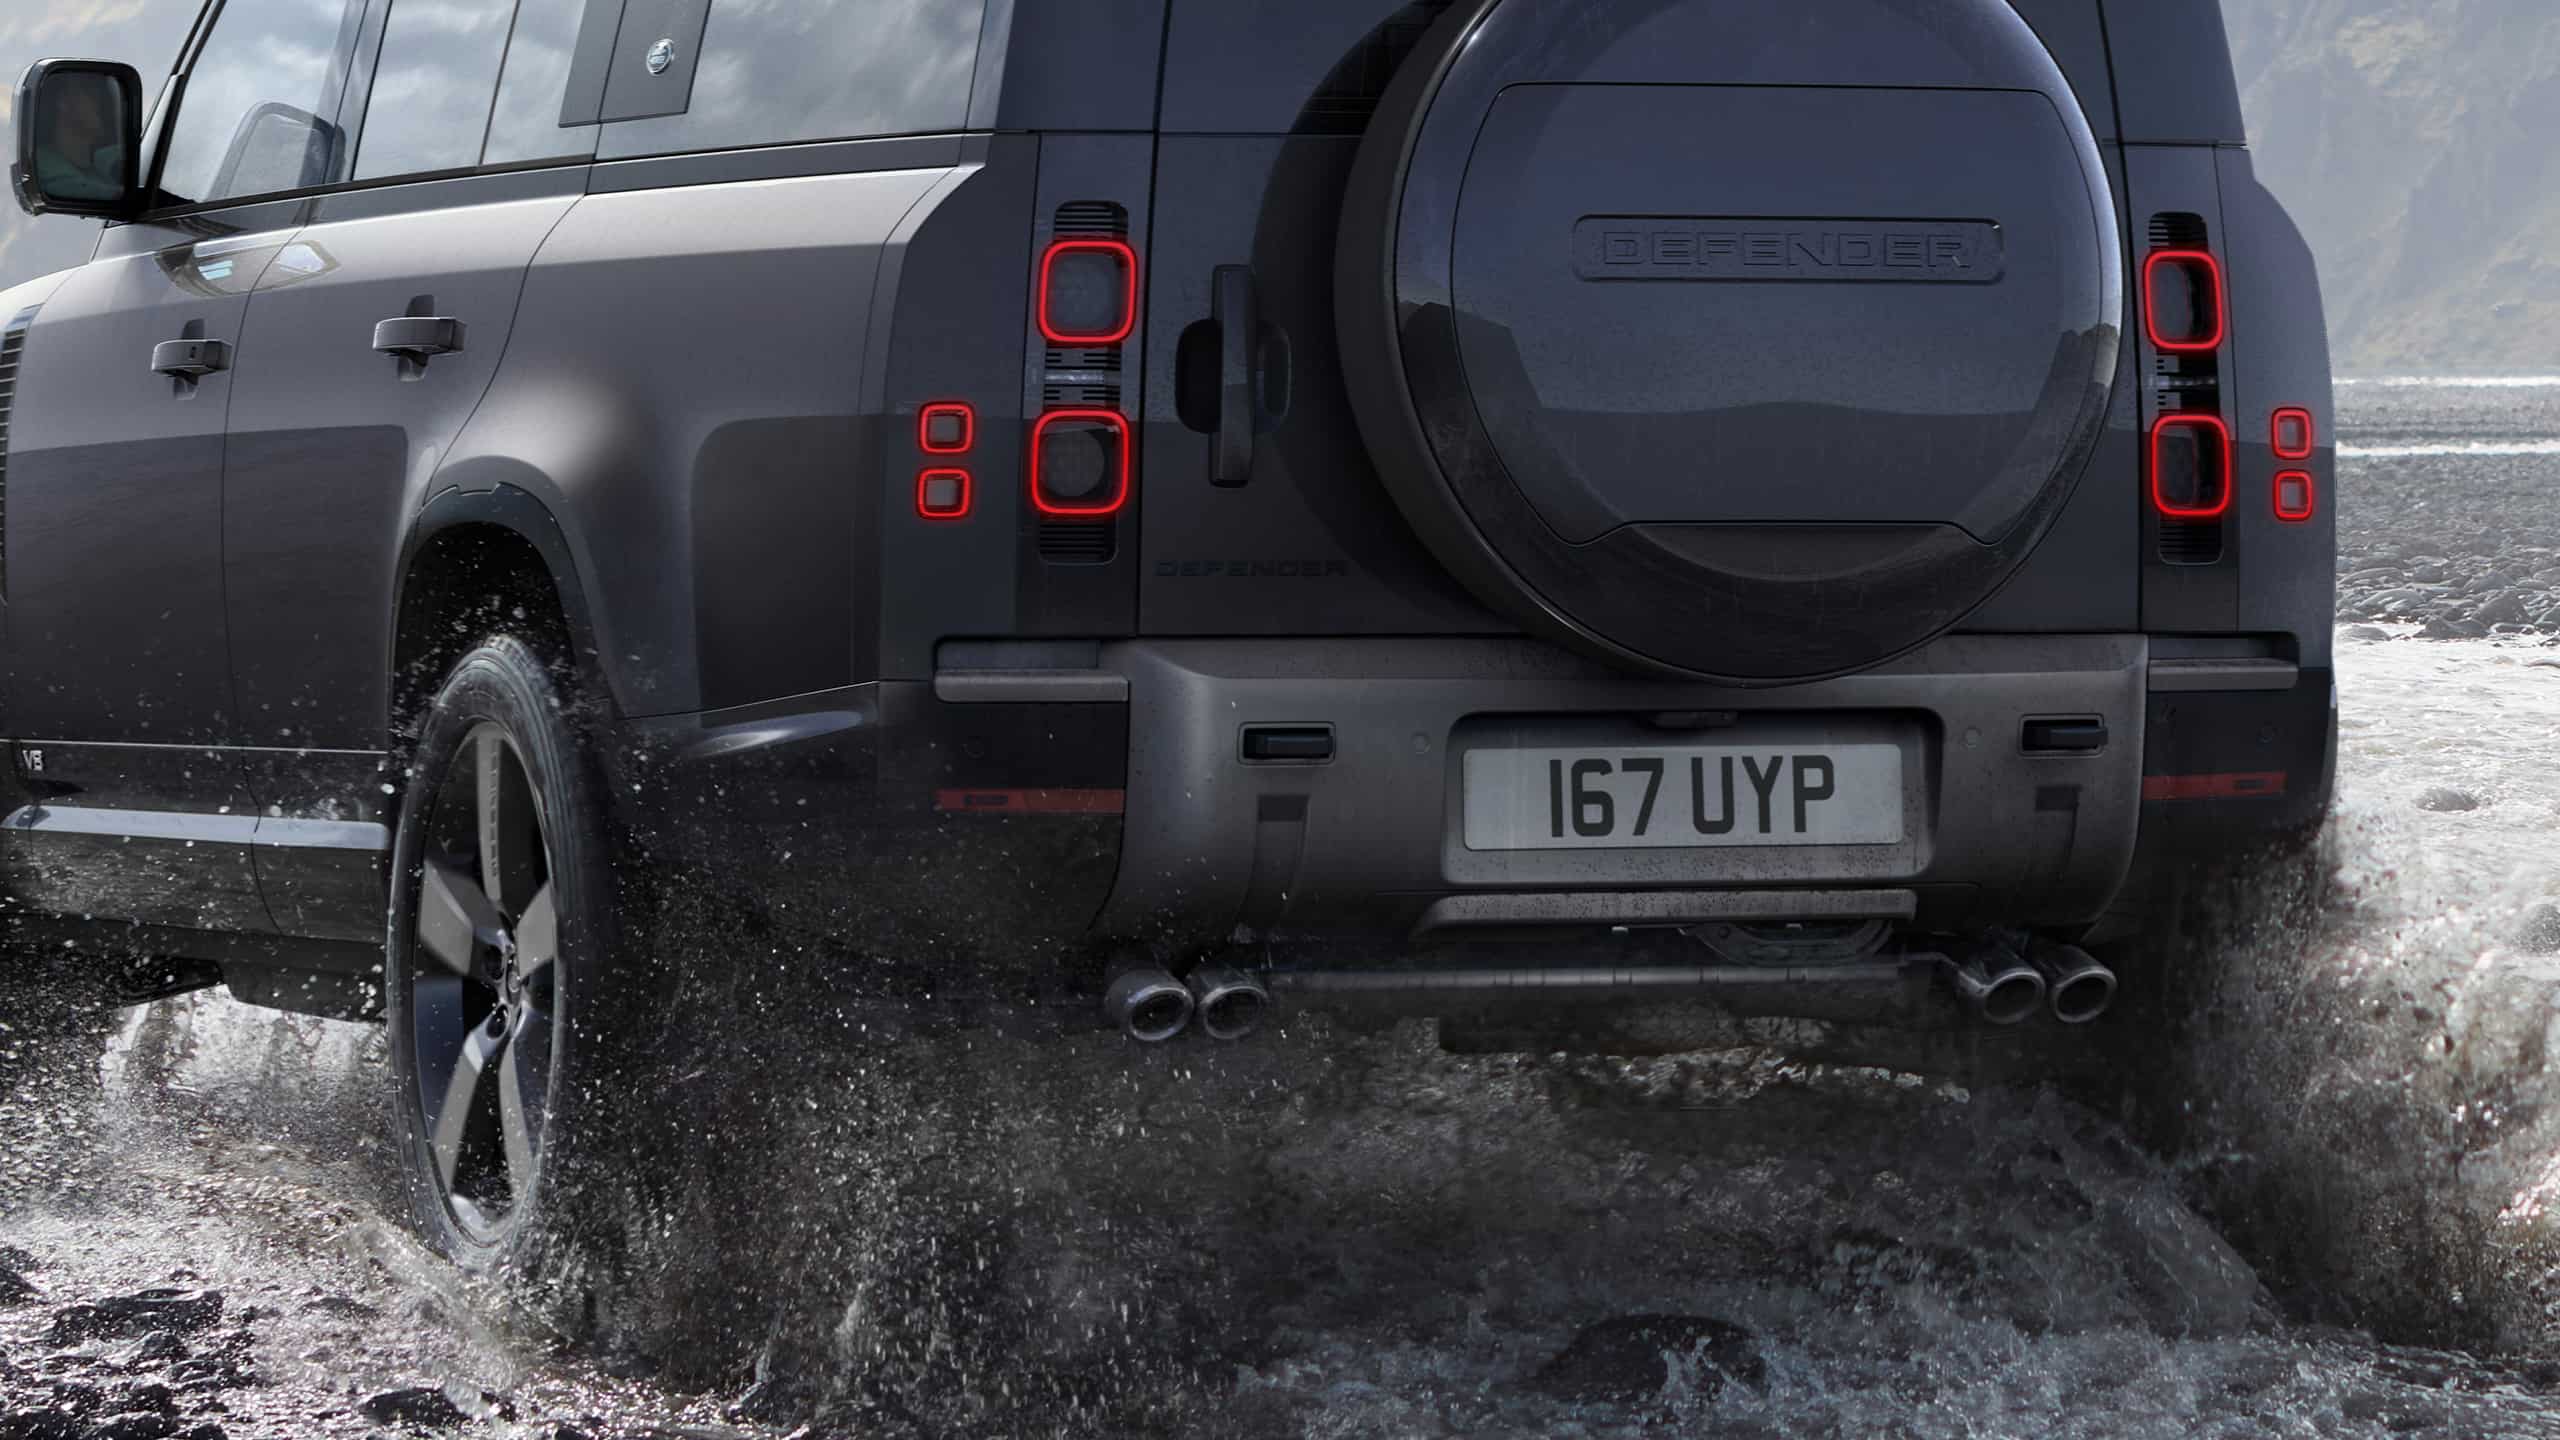 Defender is off roading in the mud of the river